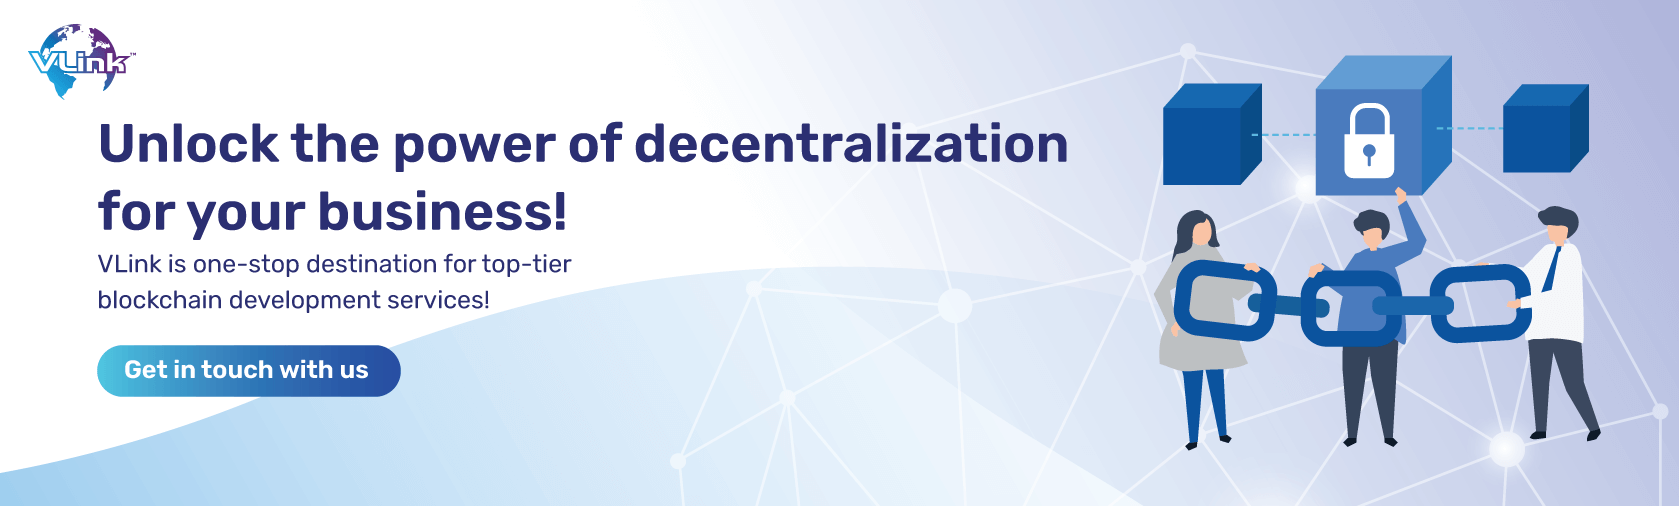 Unlock the power of decentralization for your business